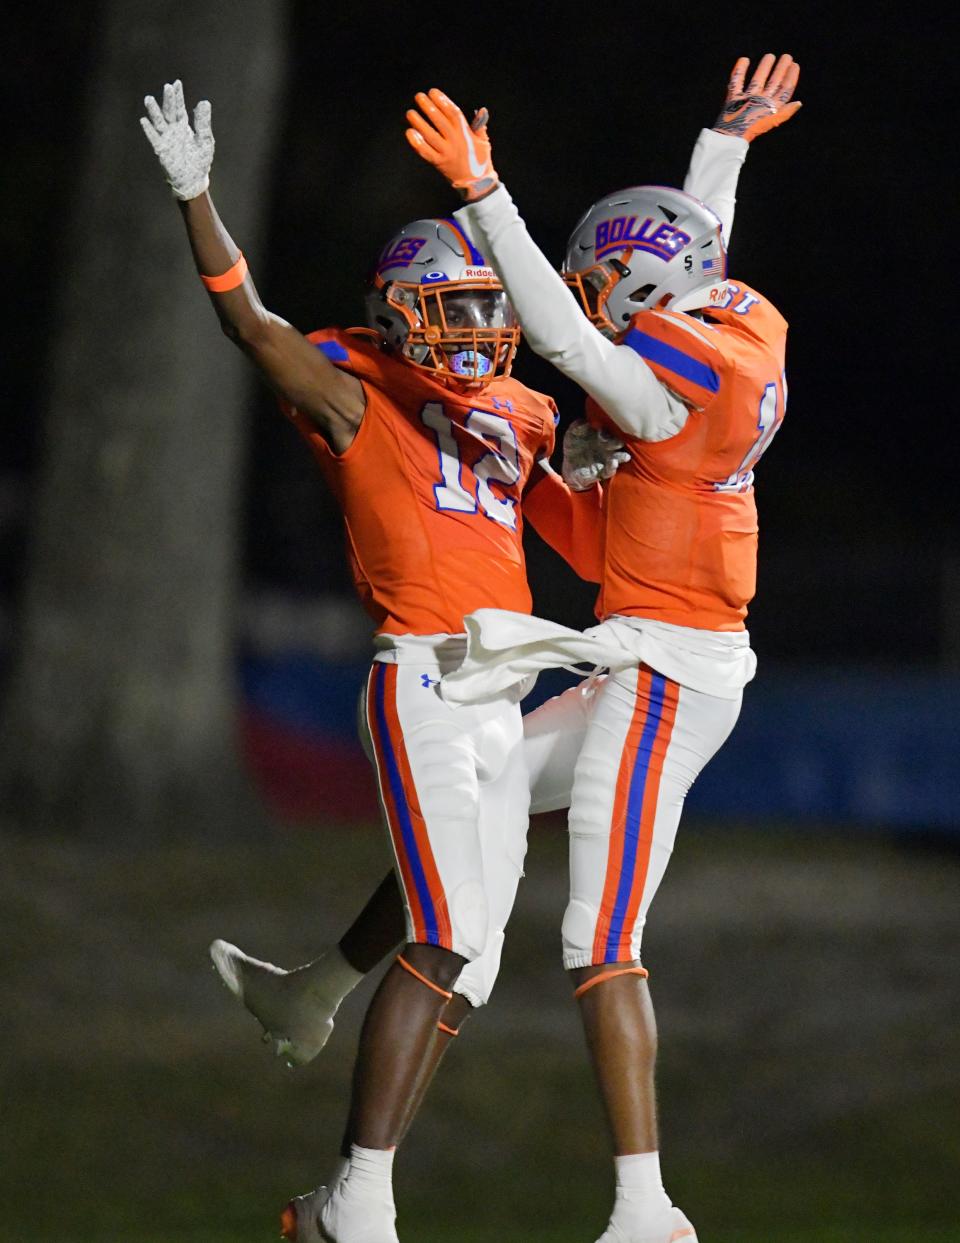 Bolles Bulldogs' Naeem Burroughs (12) celebrates with teammate Bolles Bulldogs' Chase Collier (15) after Burroughs' late second quarter catch for a touchdown. The Buchholz Bobcats traveled from Gainesville to play The Bolles School Bulldogs at Skinner-Barco Stadium in Jacksonville, FL Friday November 4, 2022.